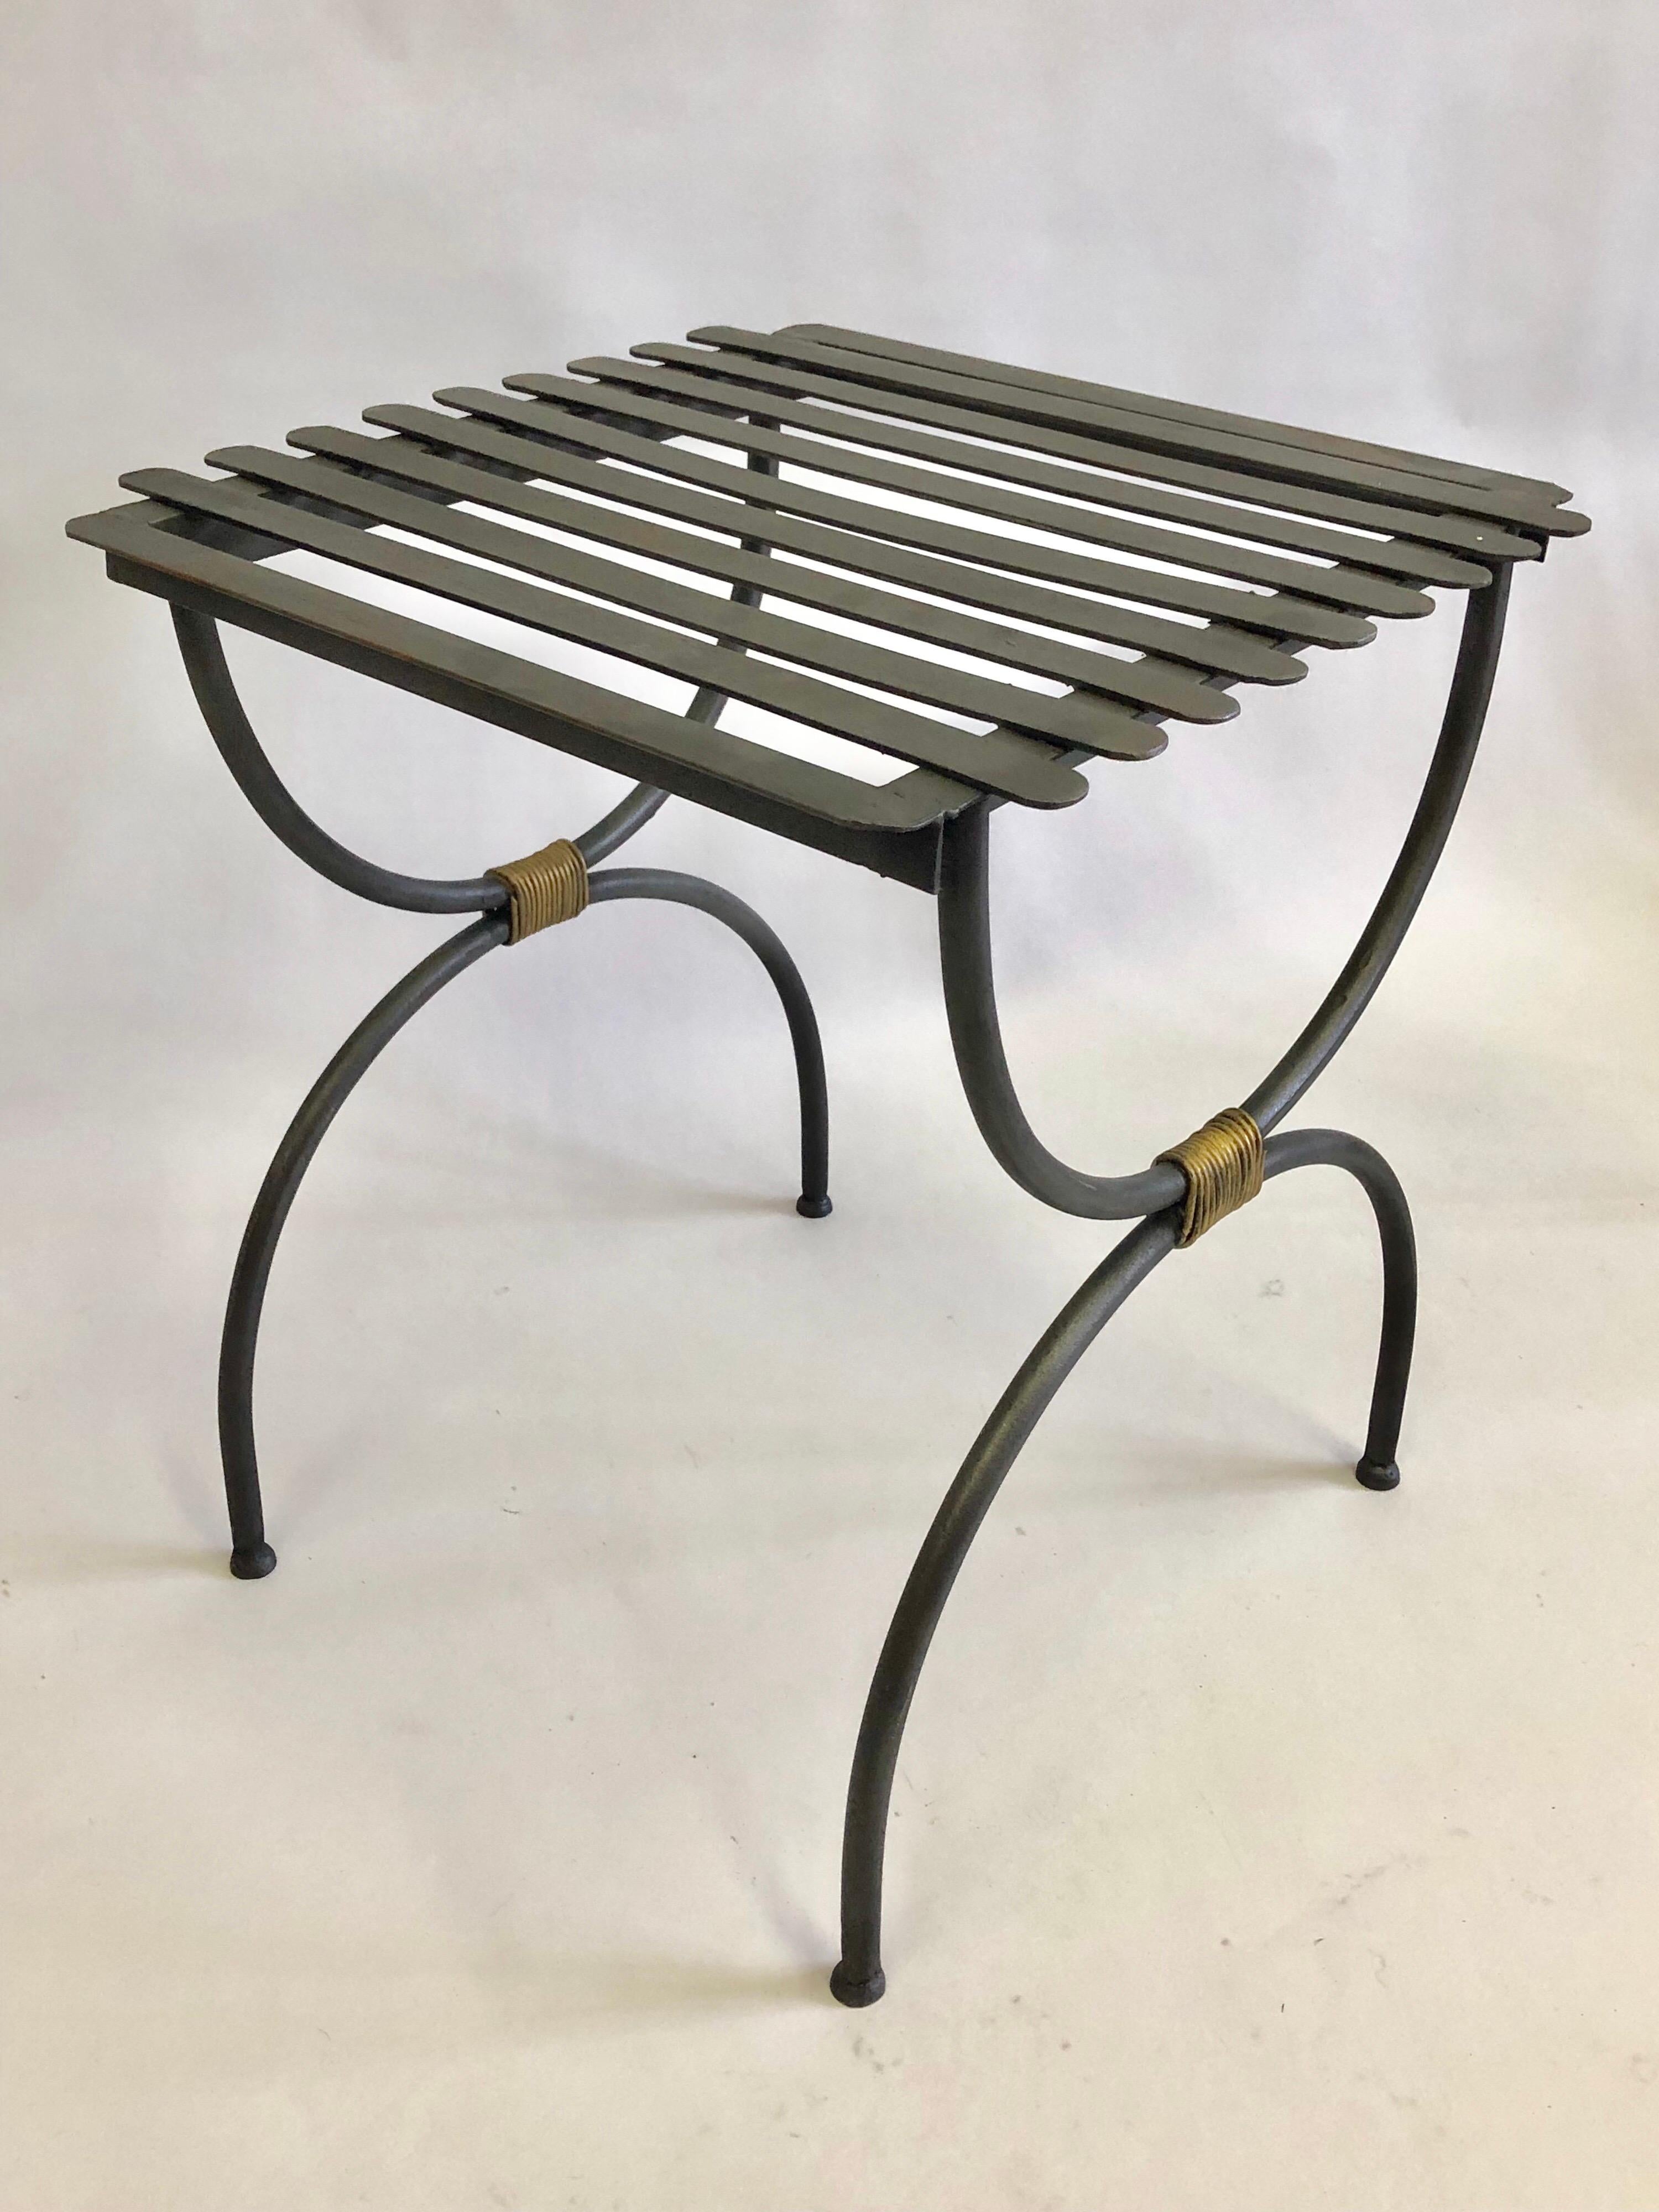 2 pairs of French Mid-Century Modern Neoclassical hand .wrought iron and partially gilt benches, stools or luggage racks circa 1937-1940. The pieces feature a Classic, sober X-form or Curile Form leg structure and the rope wrappings are hand gilt.